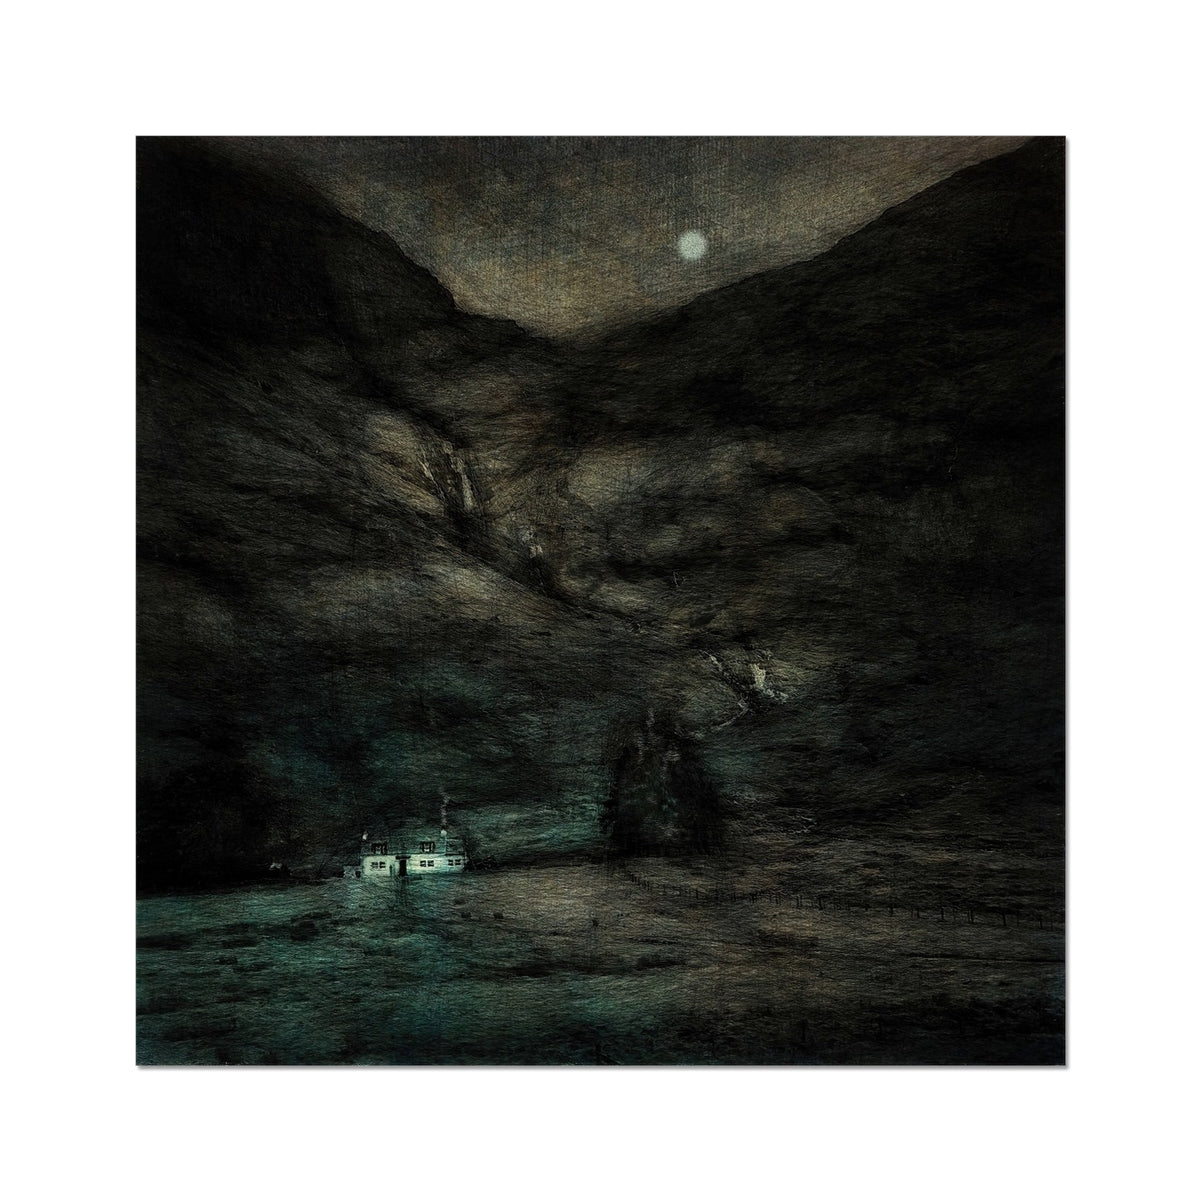 Glencoe Cottage Moonlight Painting | Artist Proof Collector Prints From Scotland-Artist Proof Collector Prints-Glencoe Art Gallery-20"x20"-Paintings, Prints, Homeware, Art Gifts From Scotland By Scottish Artist Kevin Hunter